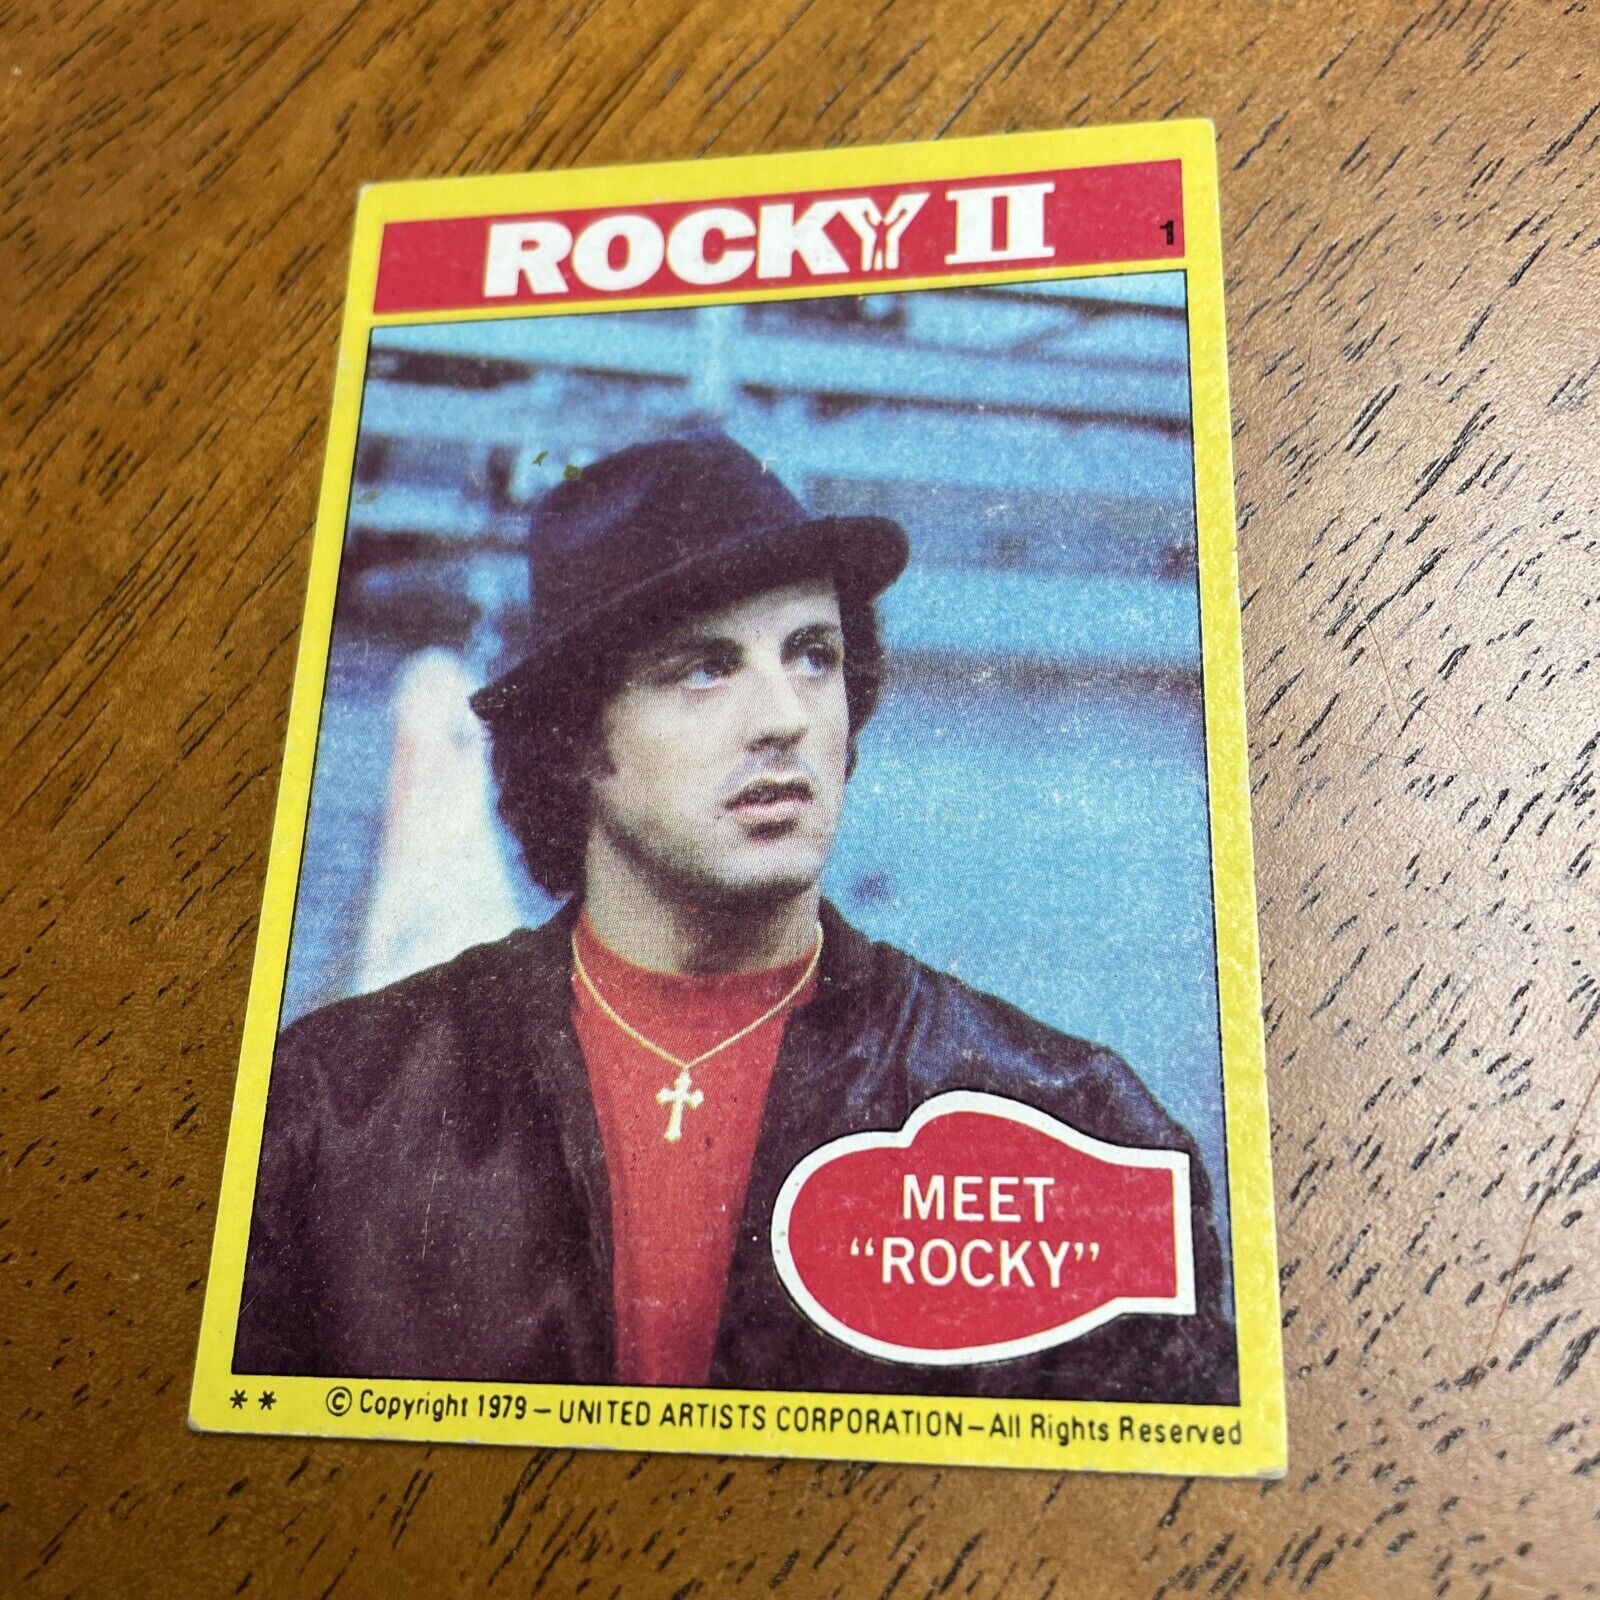 1979 Topps Trading Card Rocky II Rocky Balboa Rookie Card Stallone UNGRADED #1